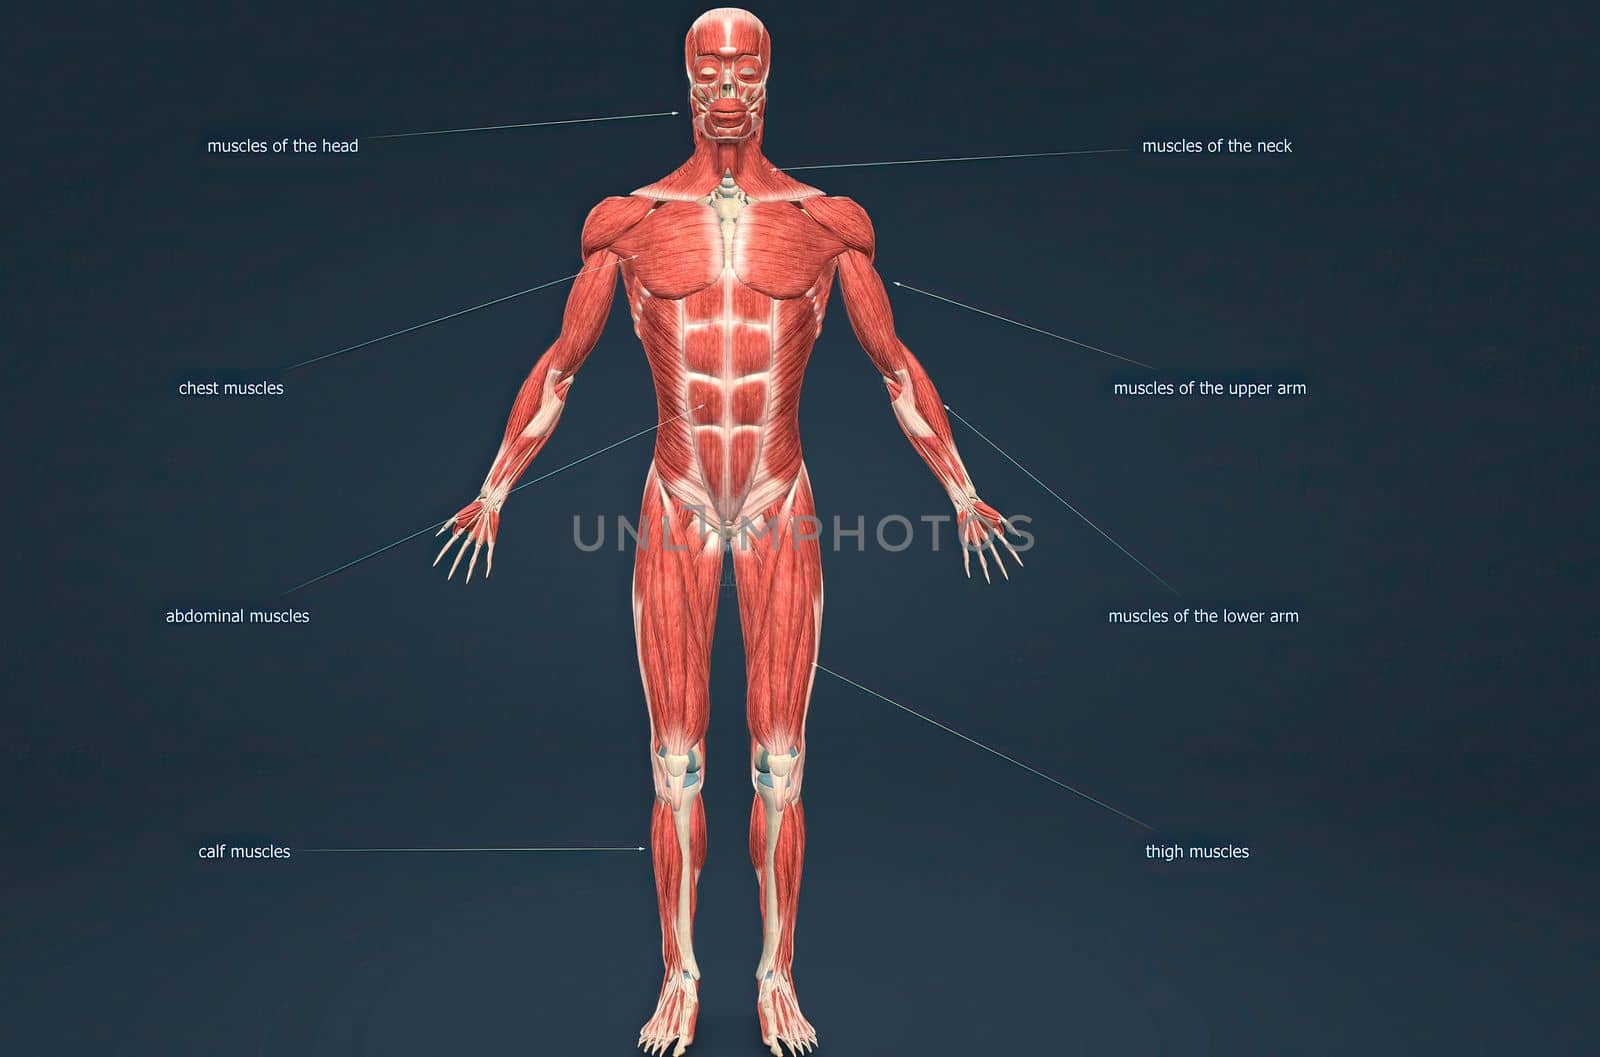 Male human muscular system anatomy 3D illustration